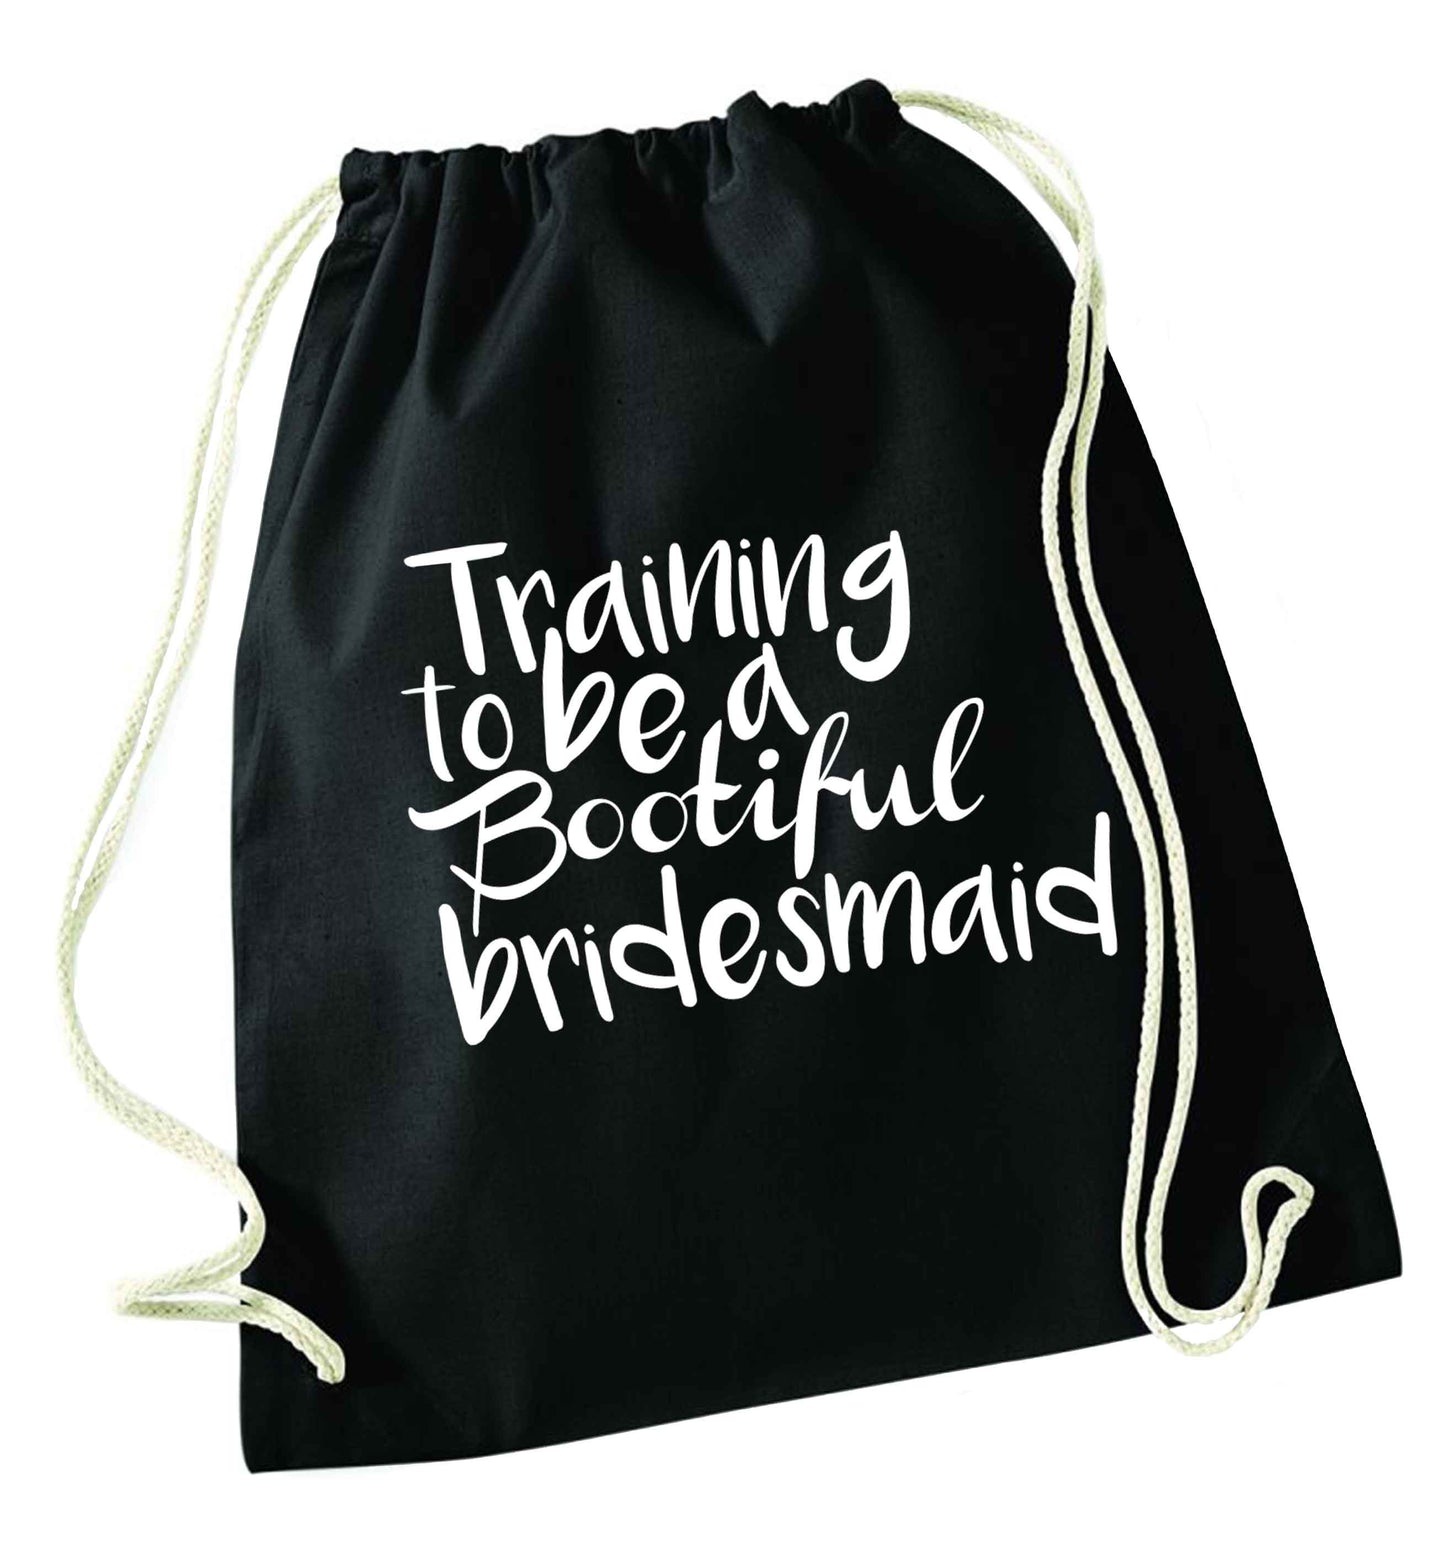 Get motivated and get fit for your big day! Our workout quotes and designs will get you ready to sweat! Perfect for any bride, groom or bridesmaid to be!  black drawstring bag